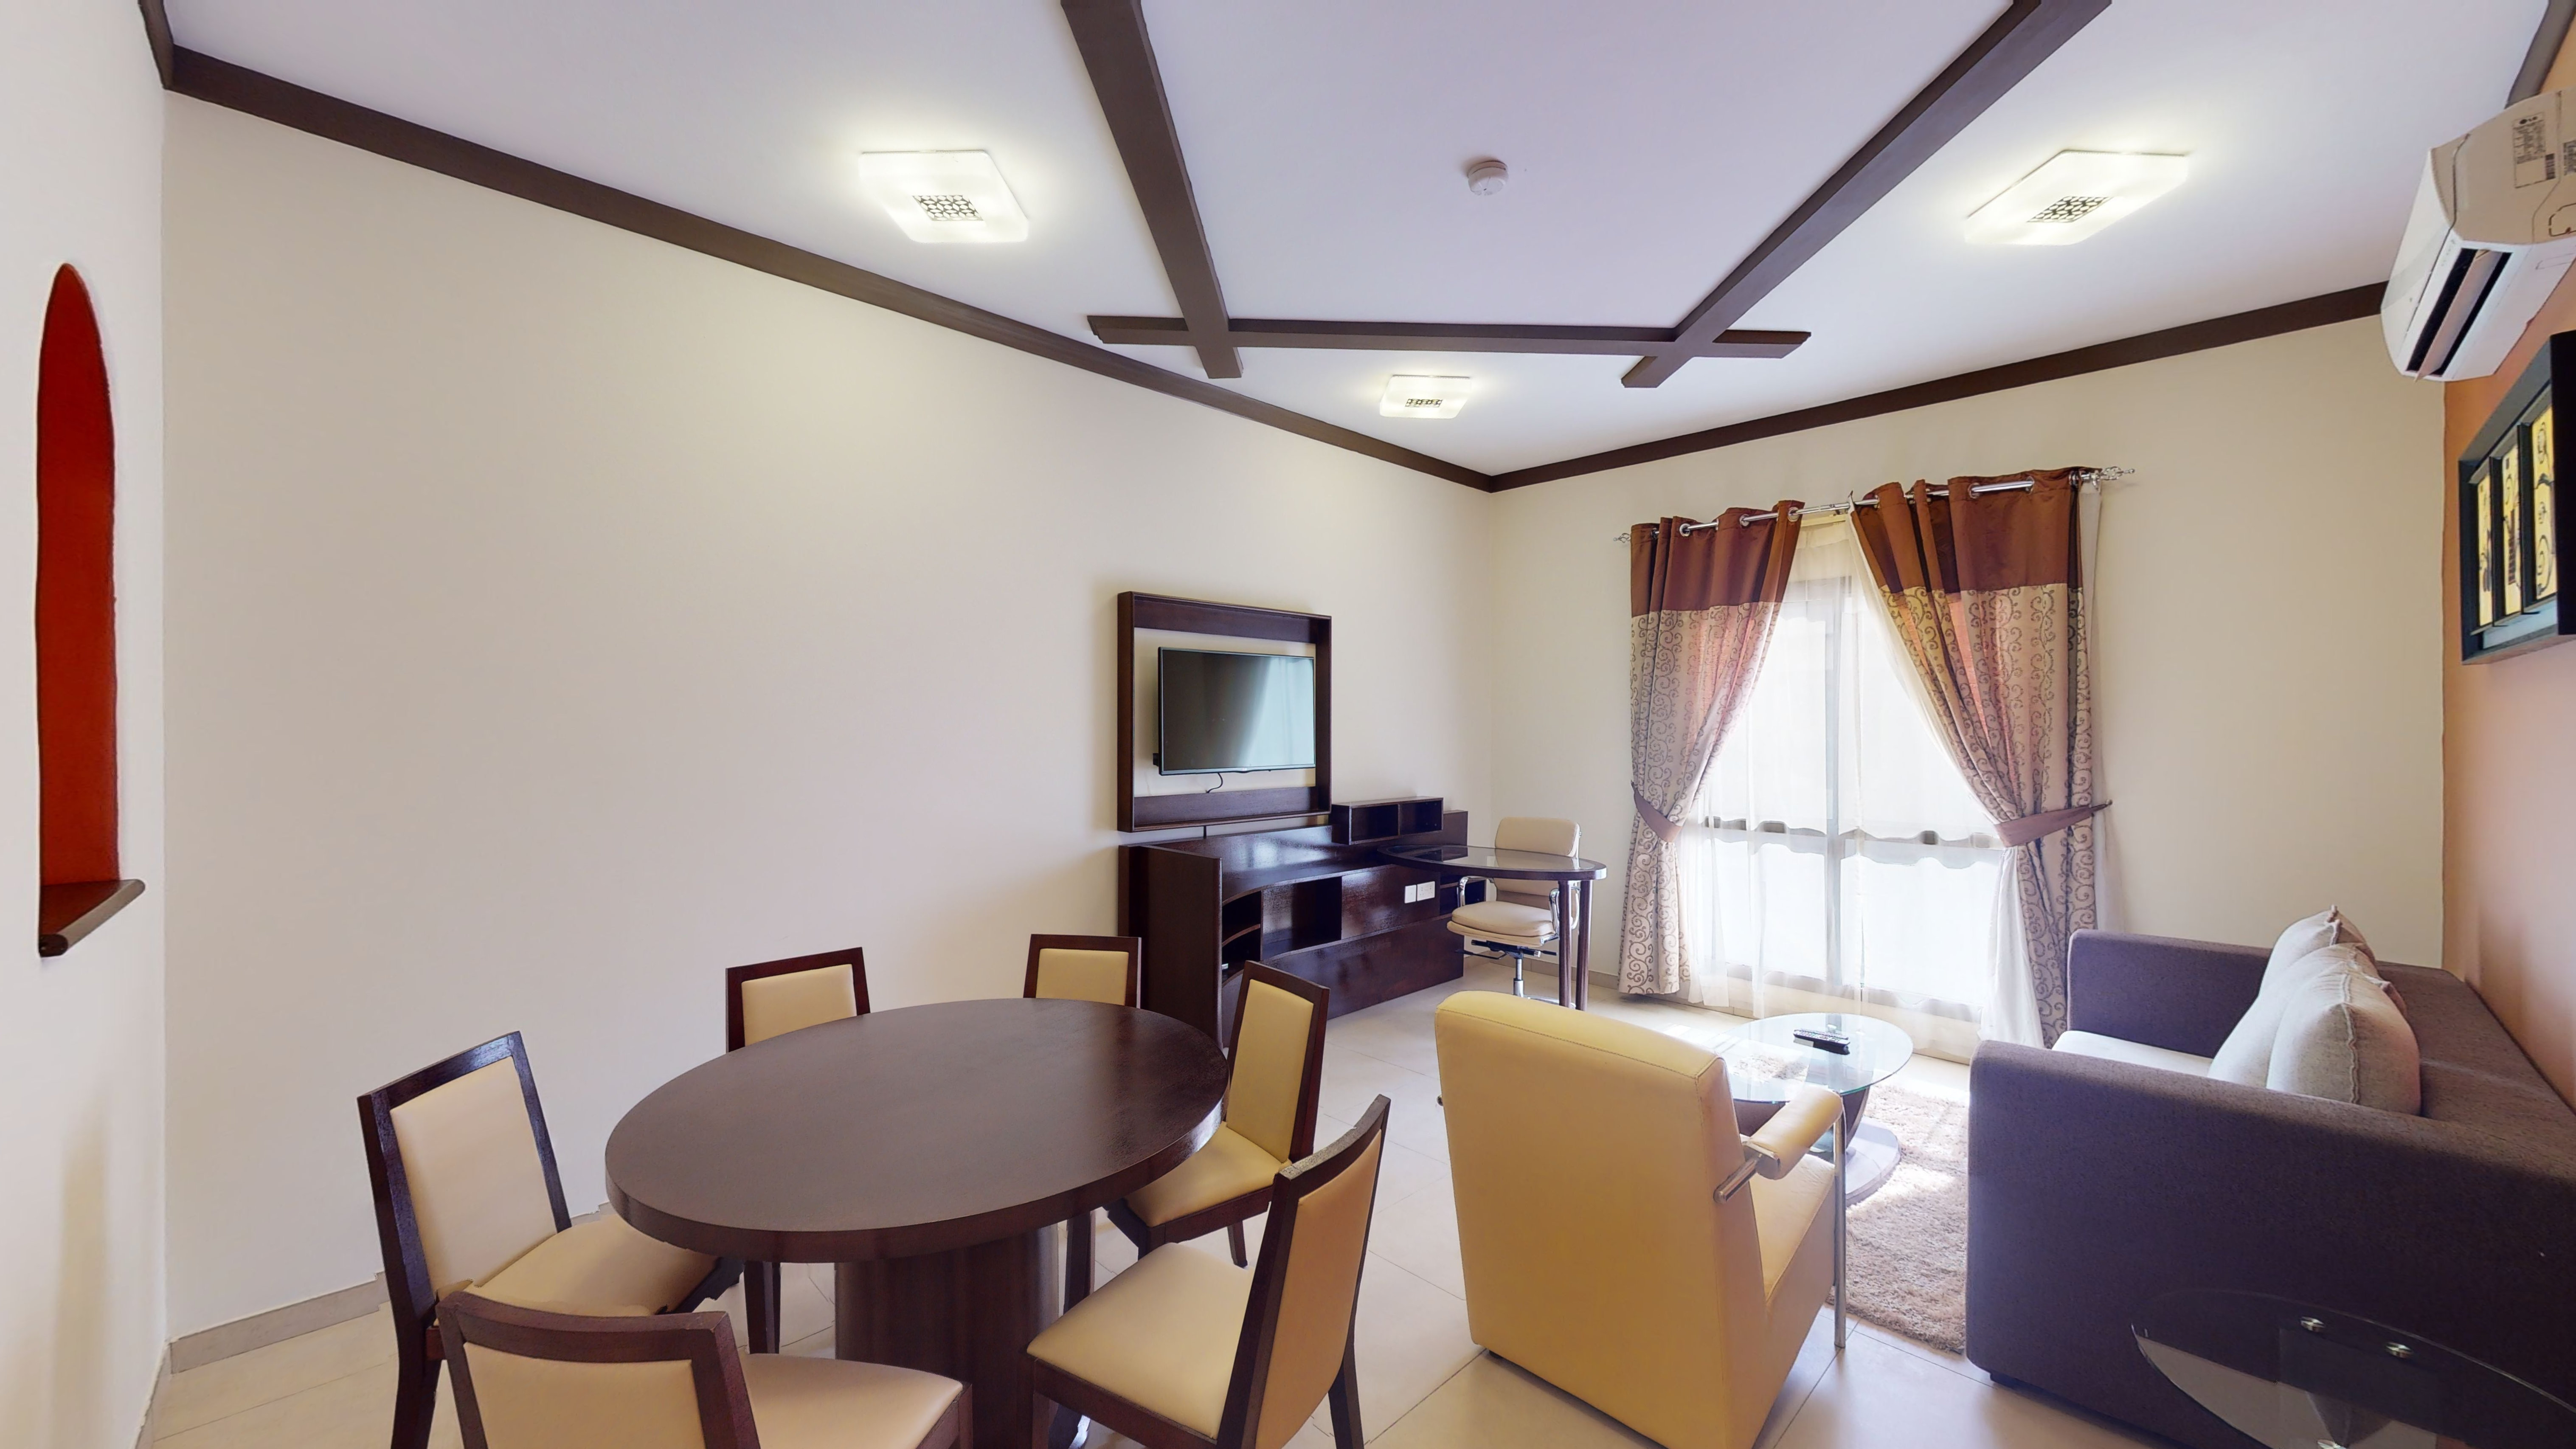 2 bedrooms furnished compound apartments in Al Gharaffa P-145